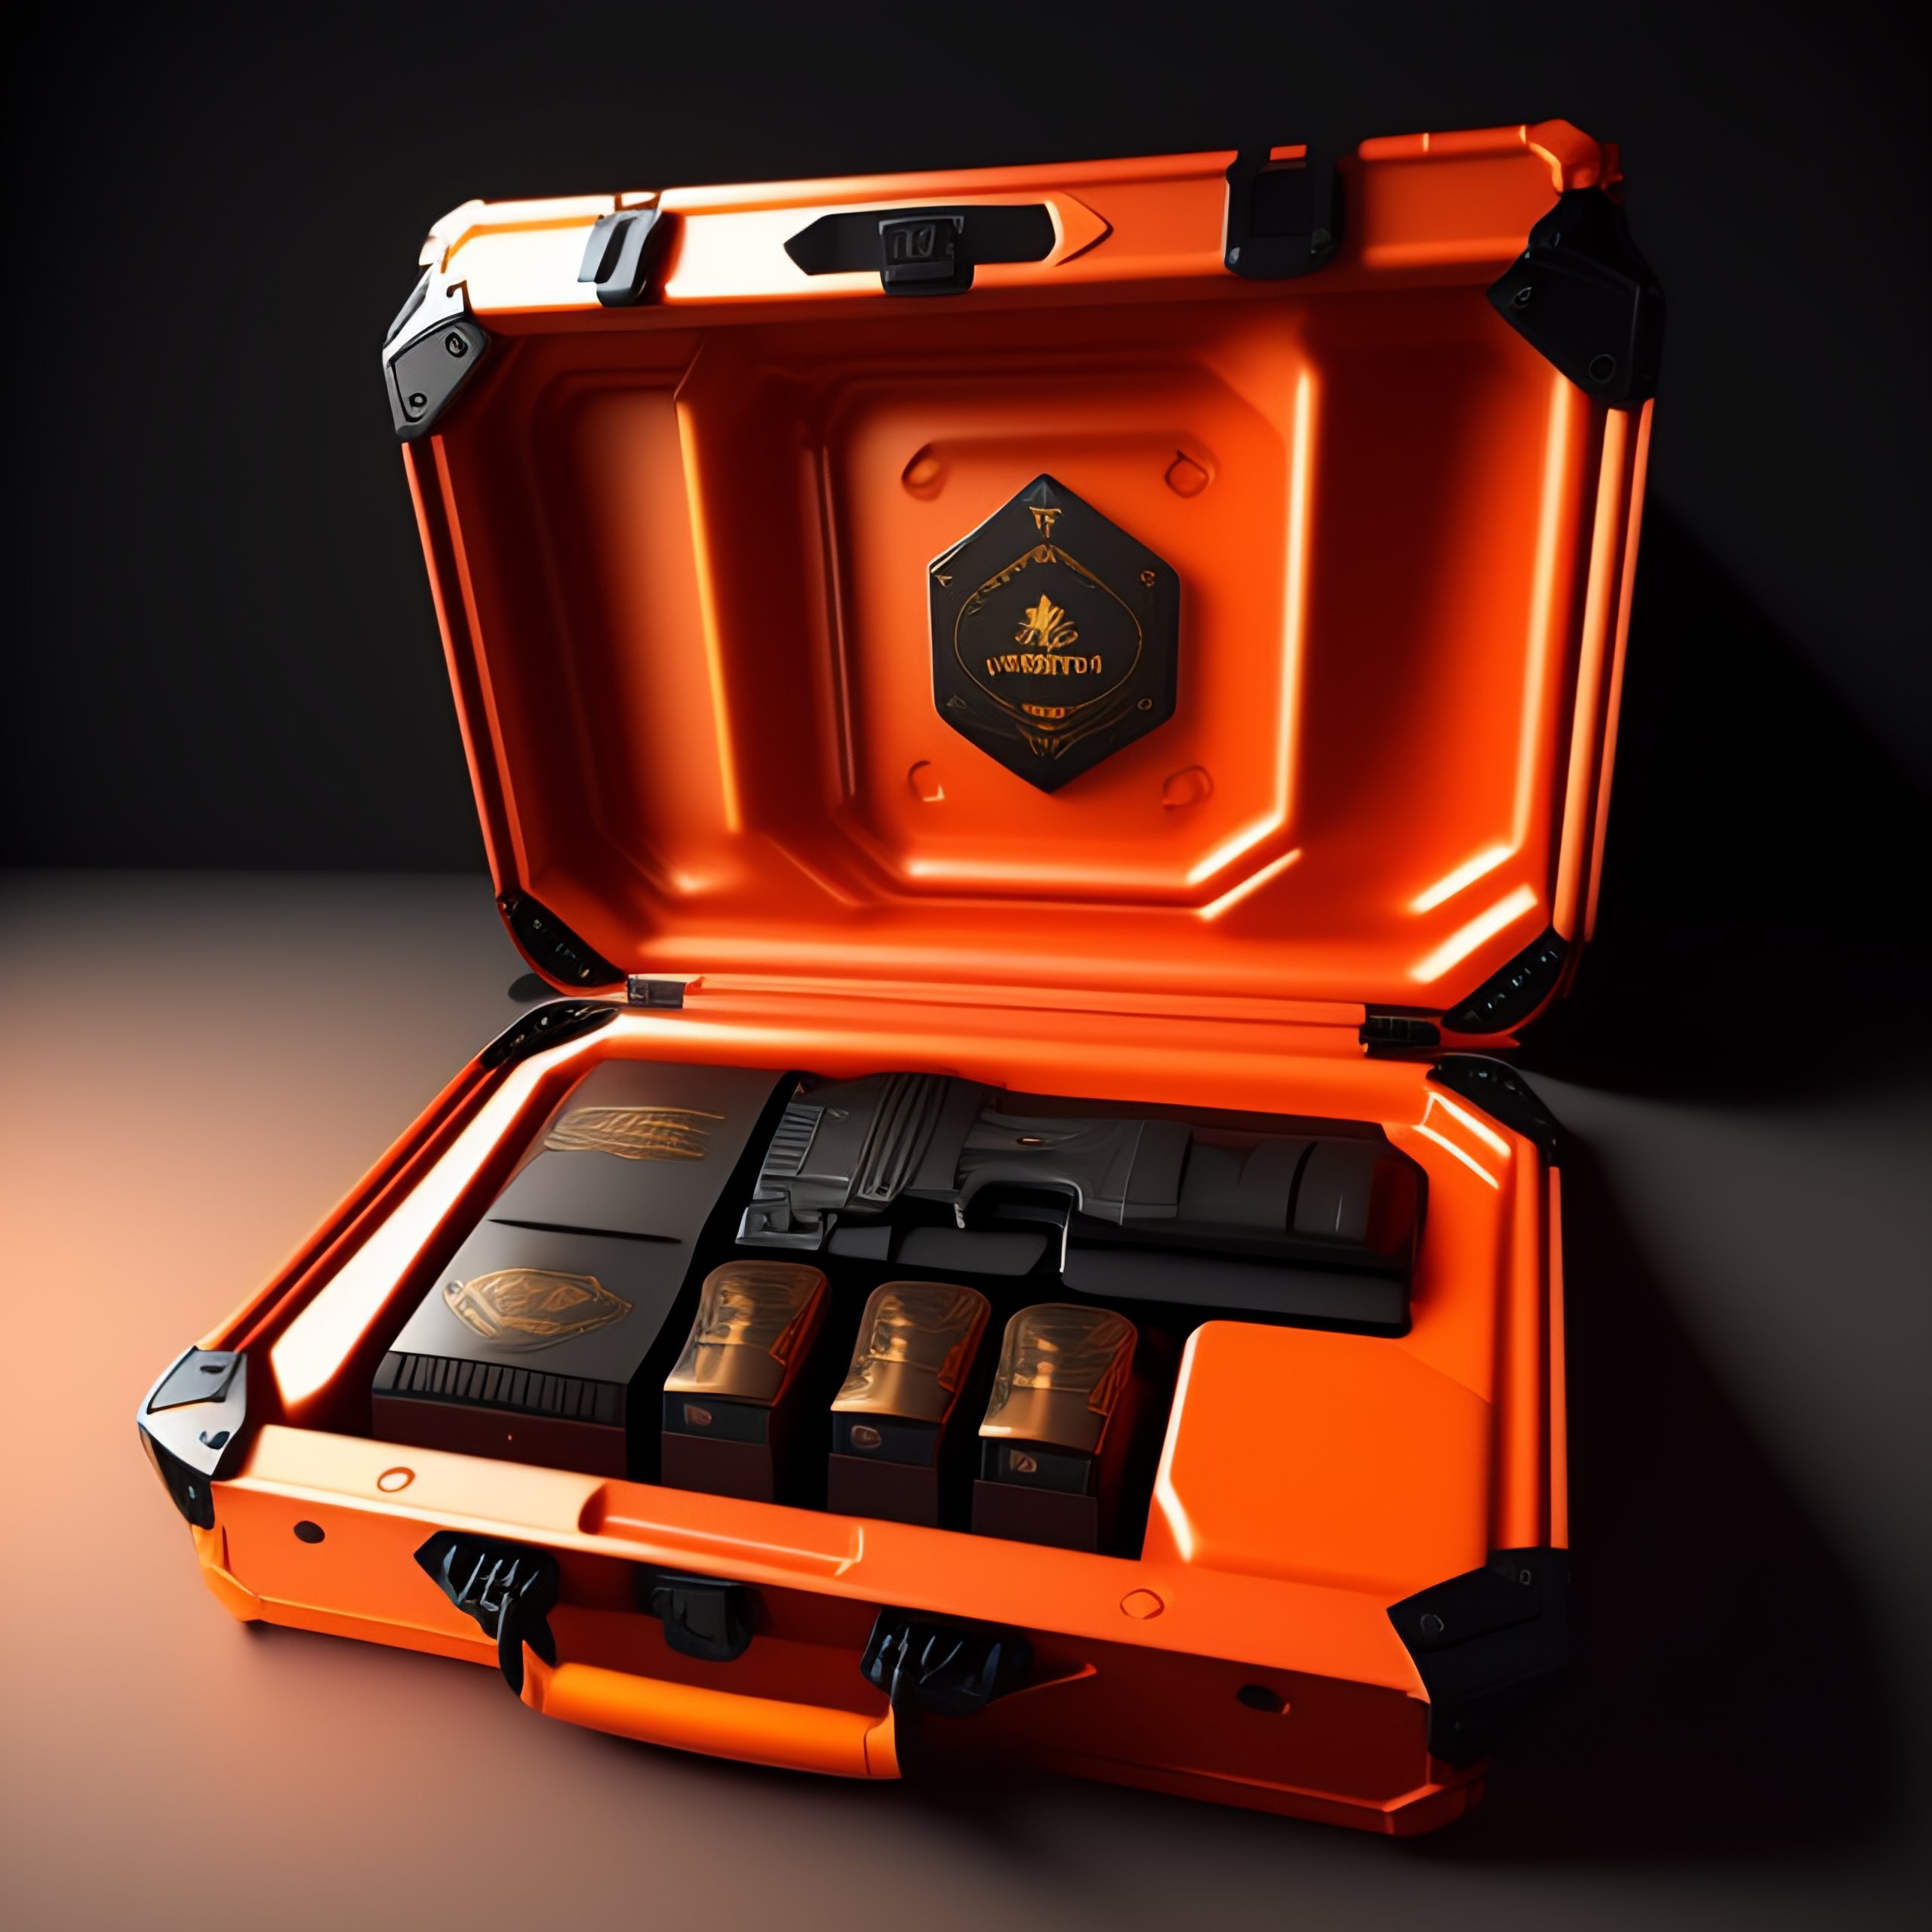 Spy Patriots Uncover the Mysteries of Spycraft with This Incredible Spy Kit